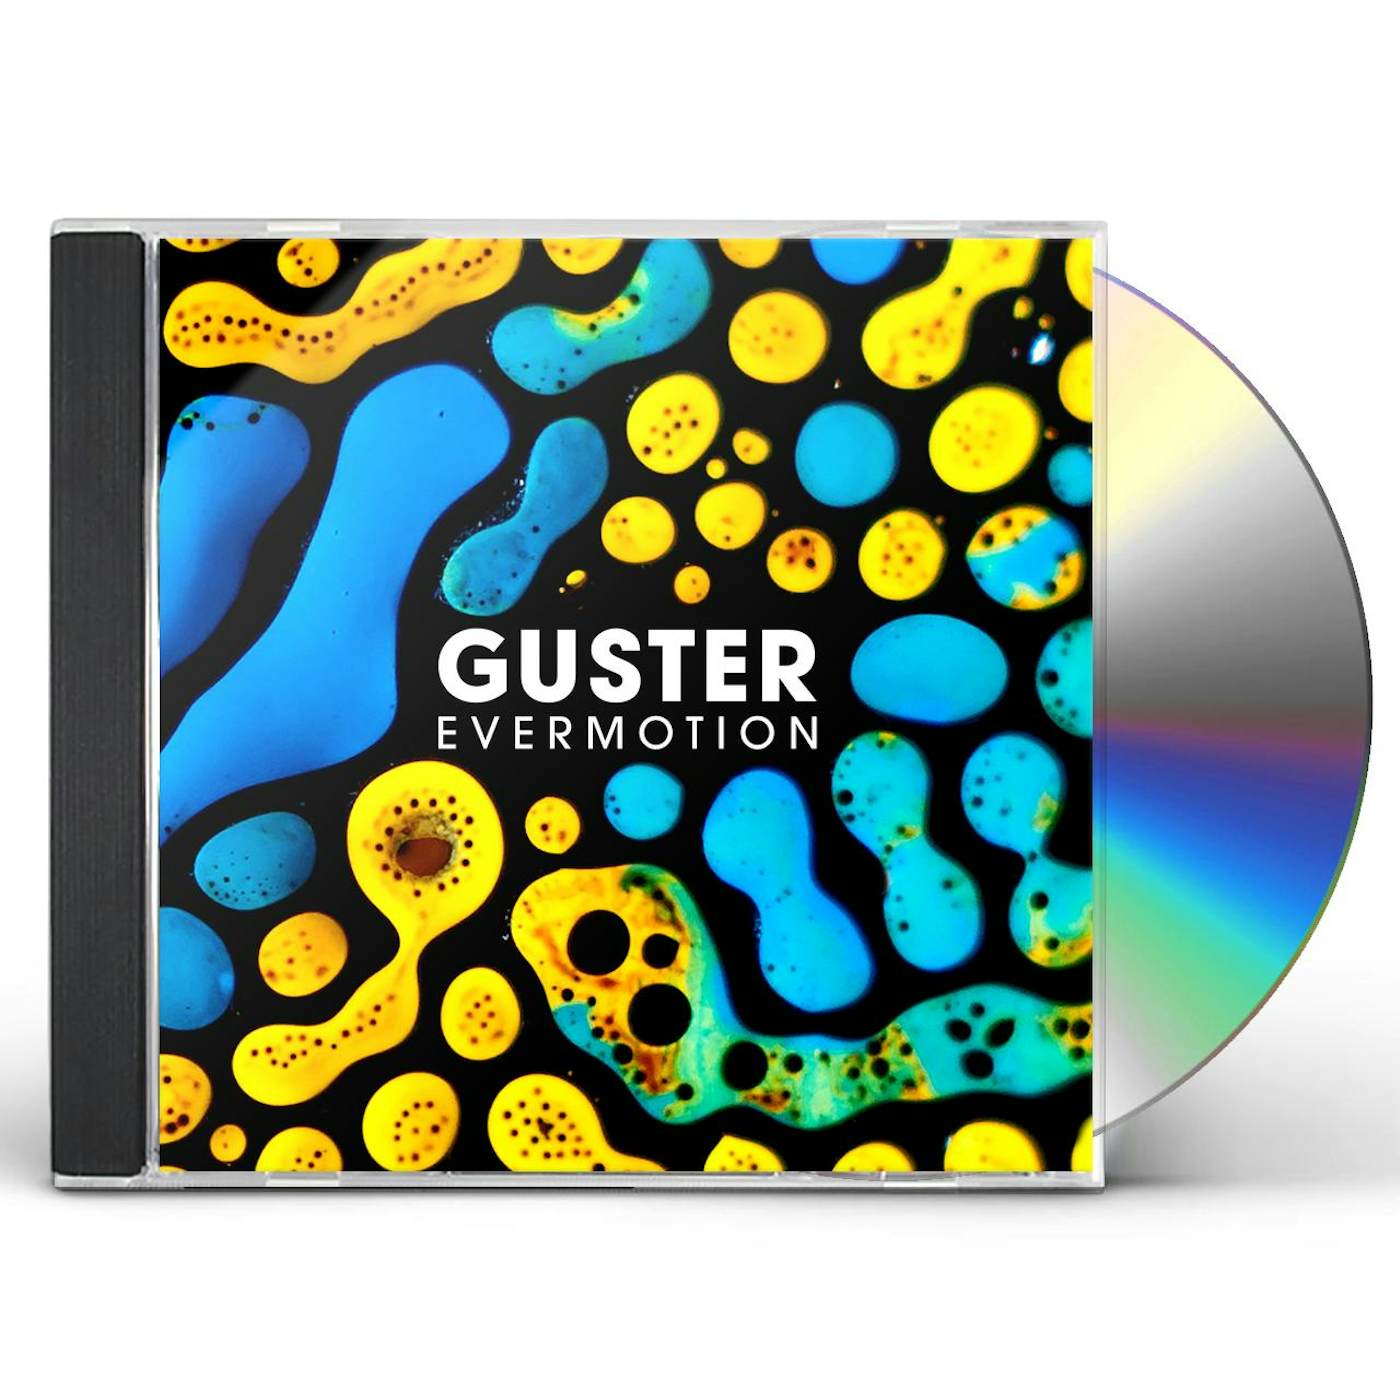 Guster EVERMOTION CD